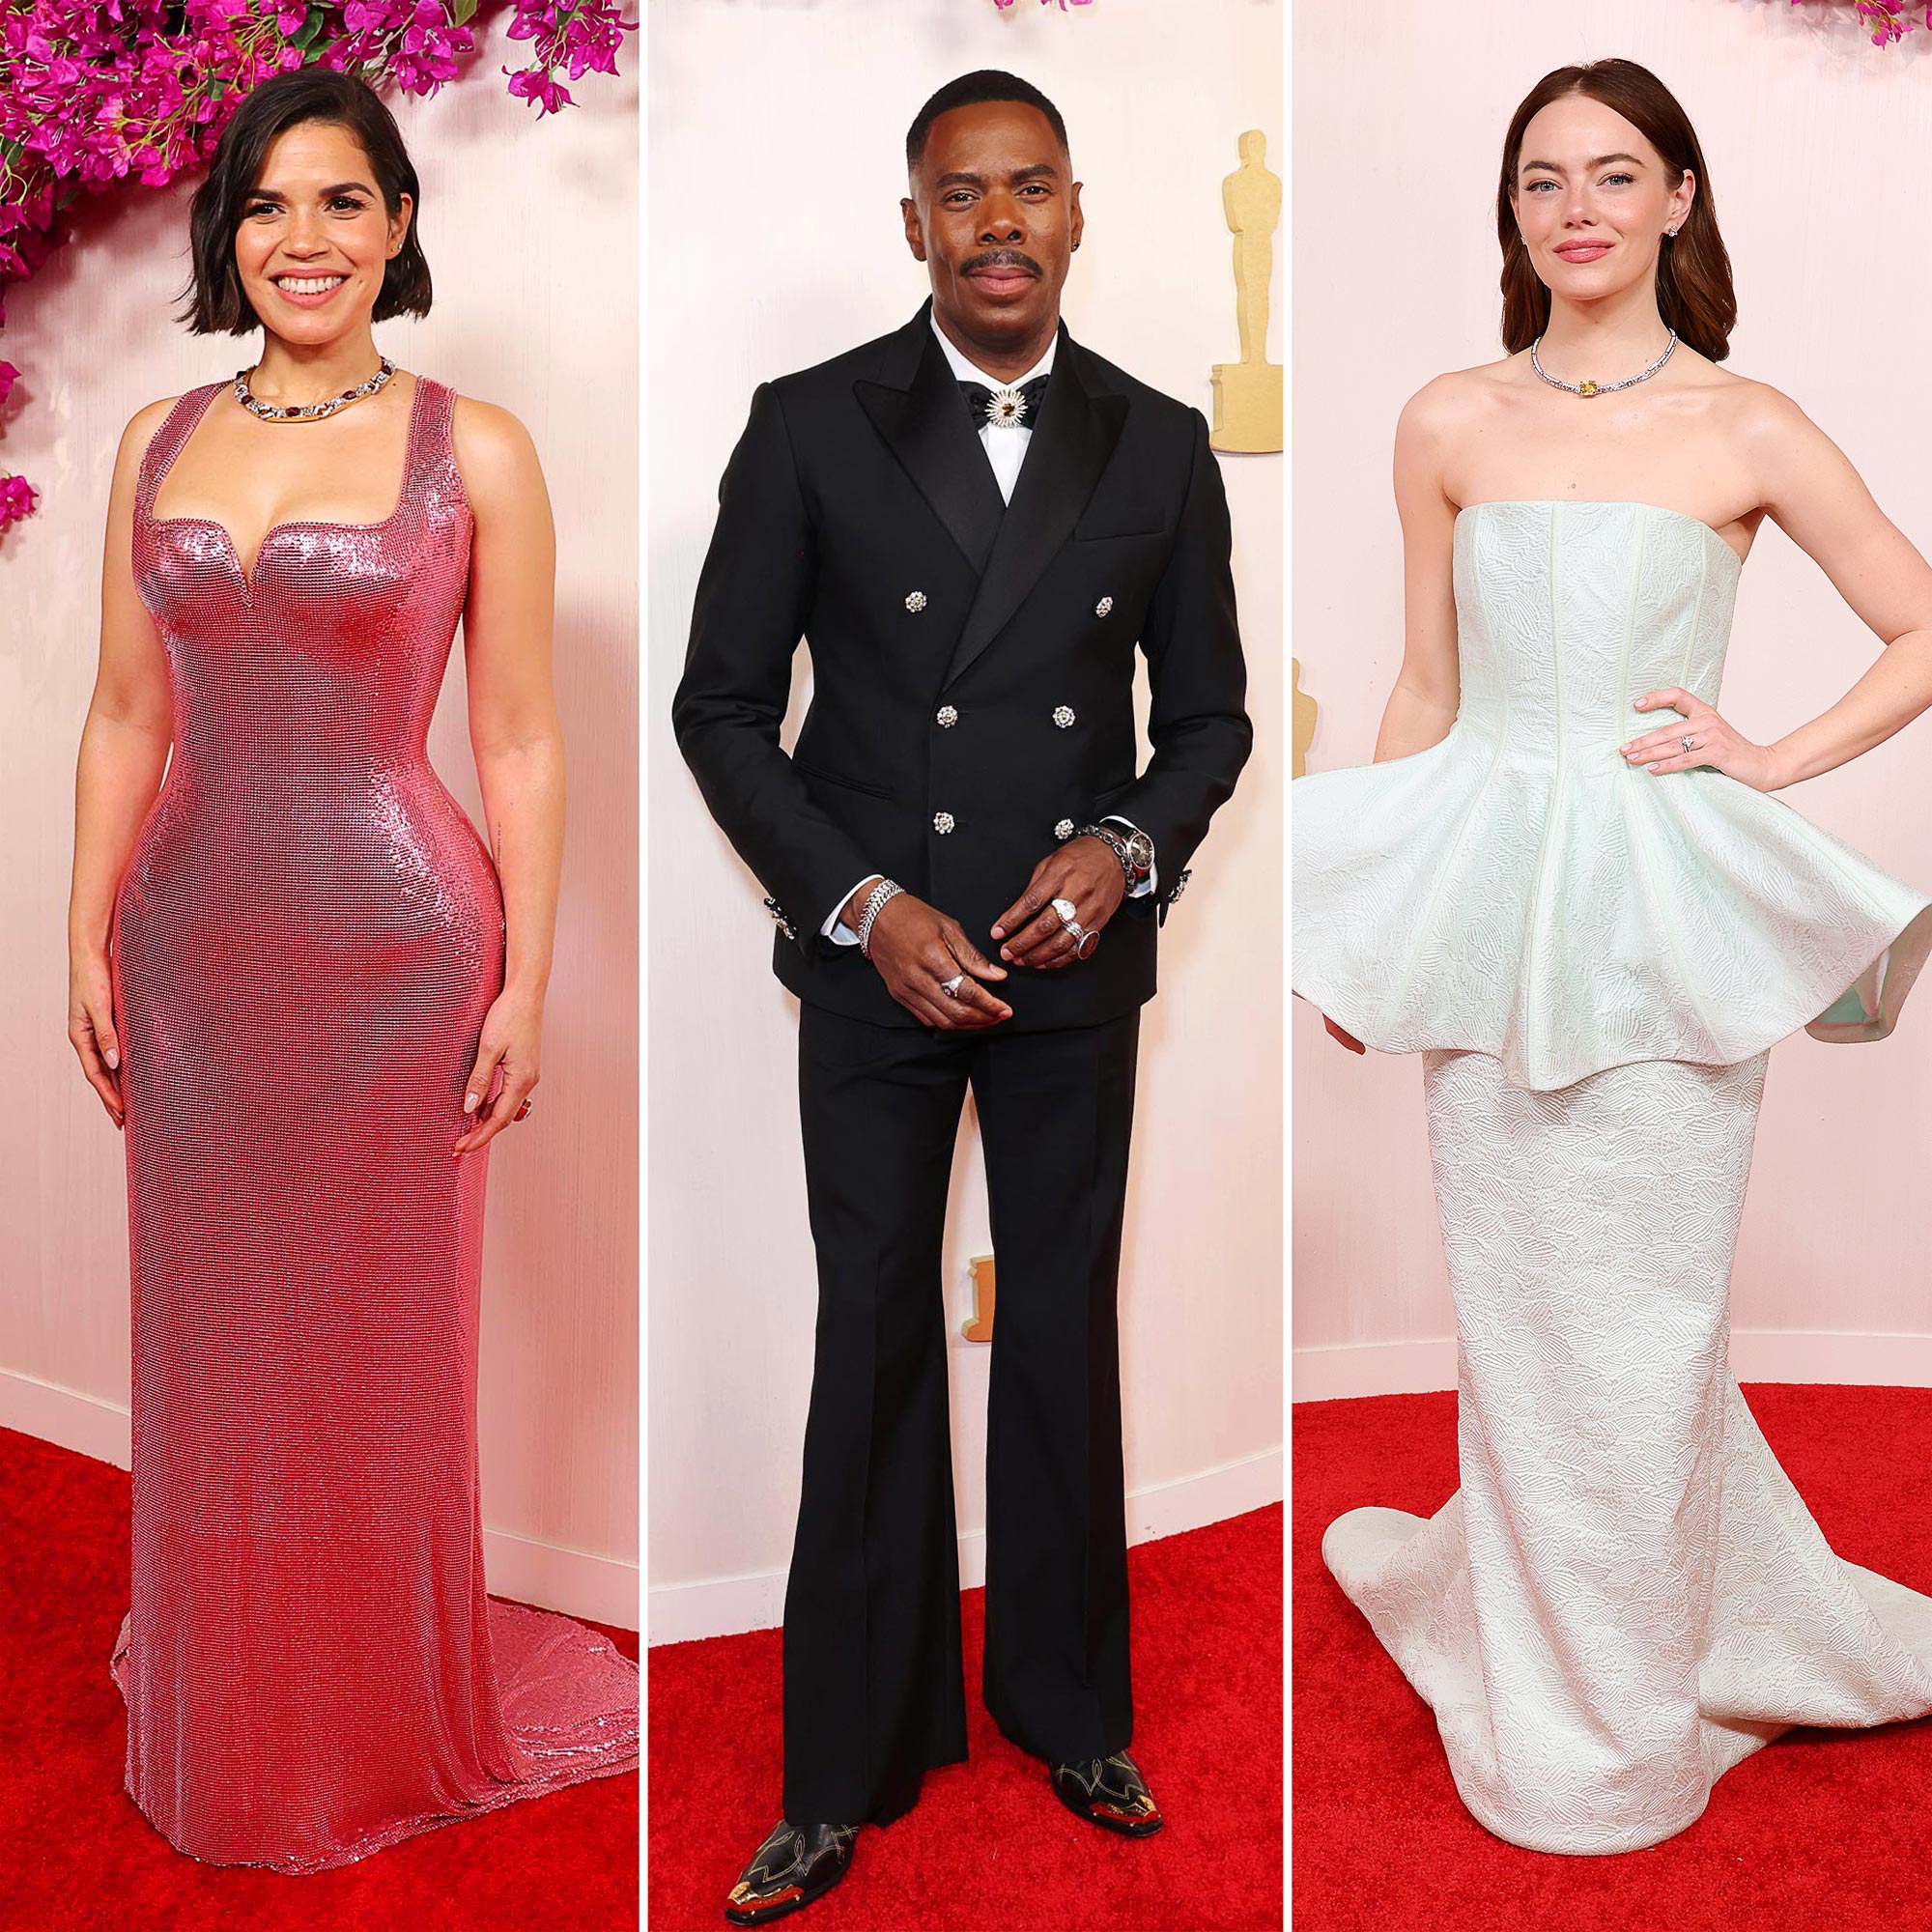 39 Oscars red carpet dresses we can't stop staring at | Oscars red carpet  dresses, Red carpet dresses best, Red carpet fashion